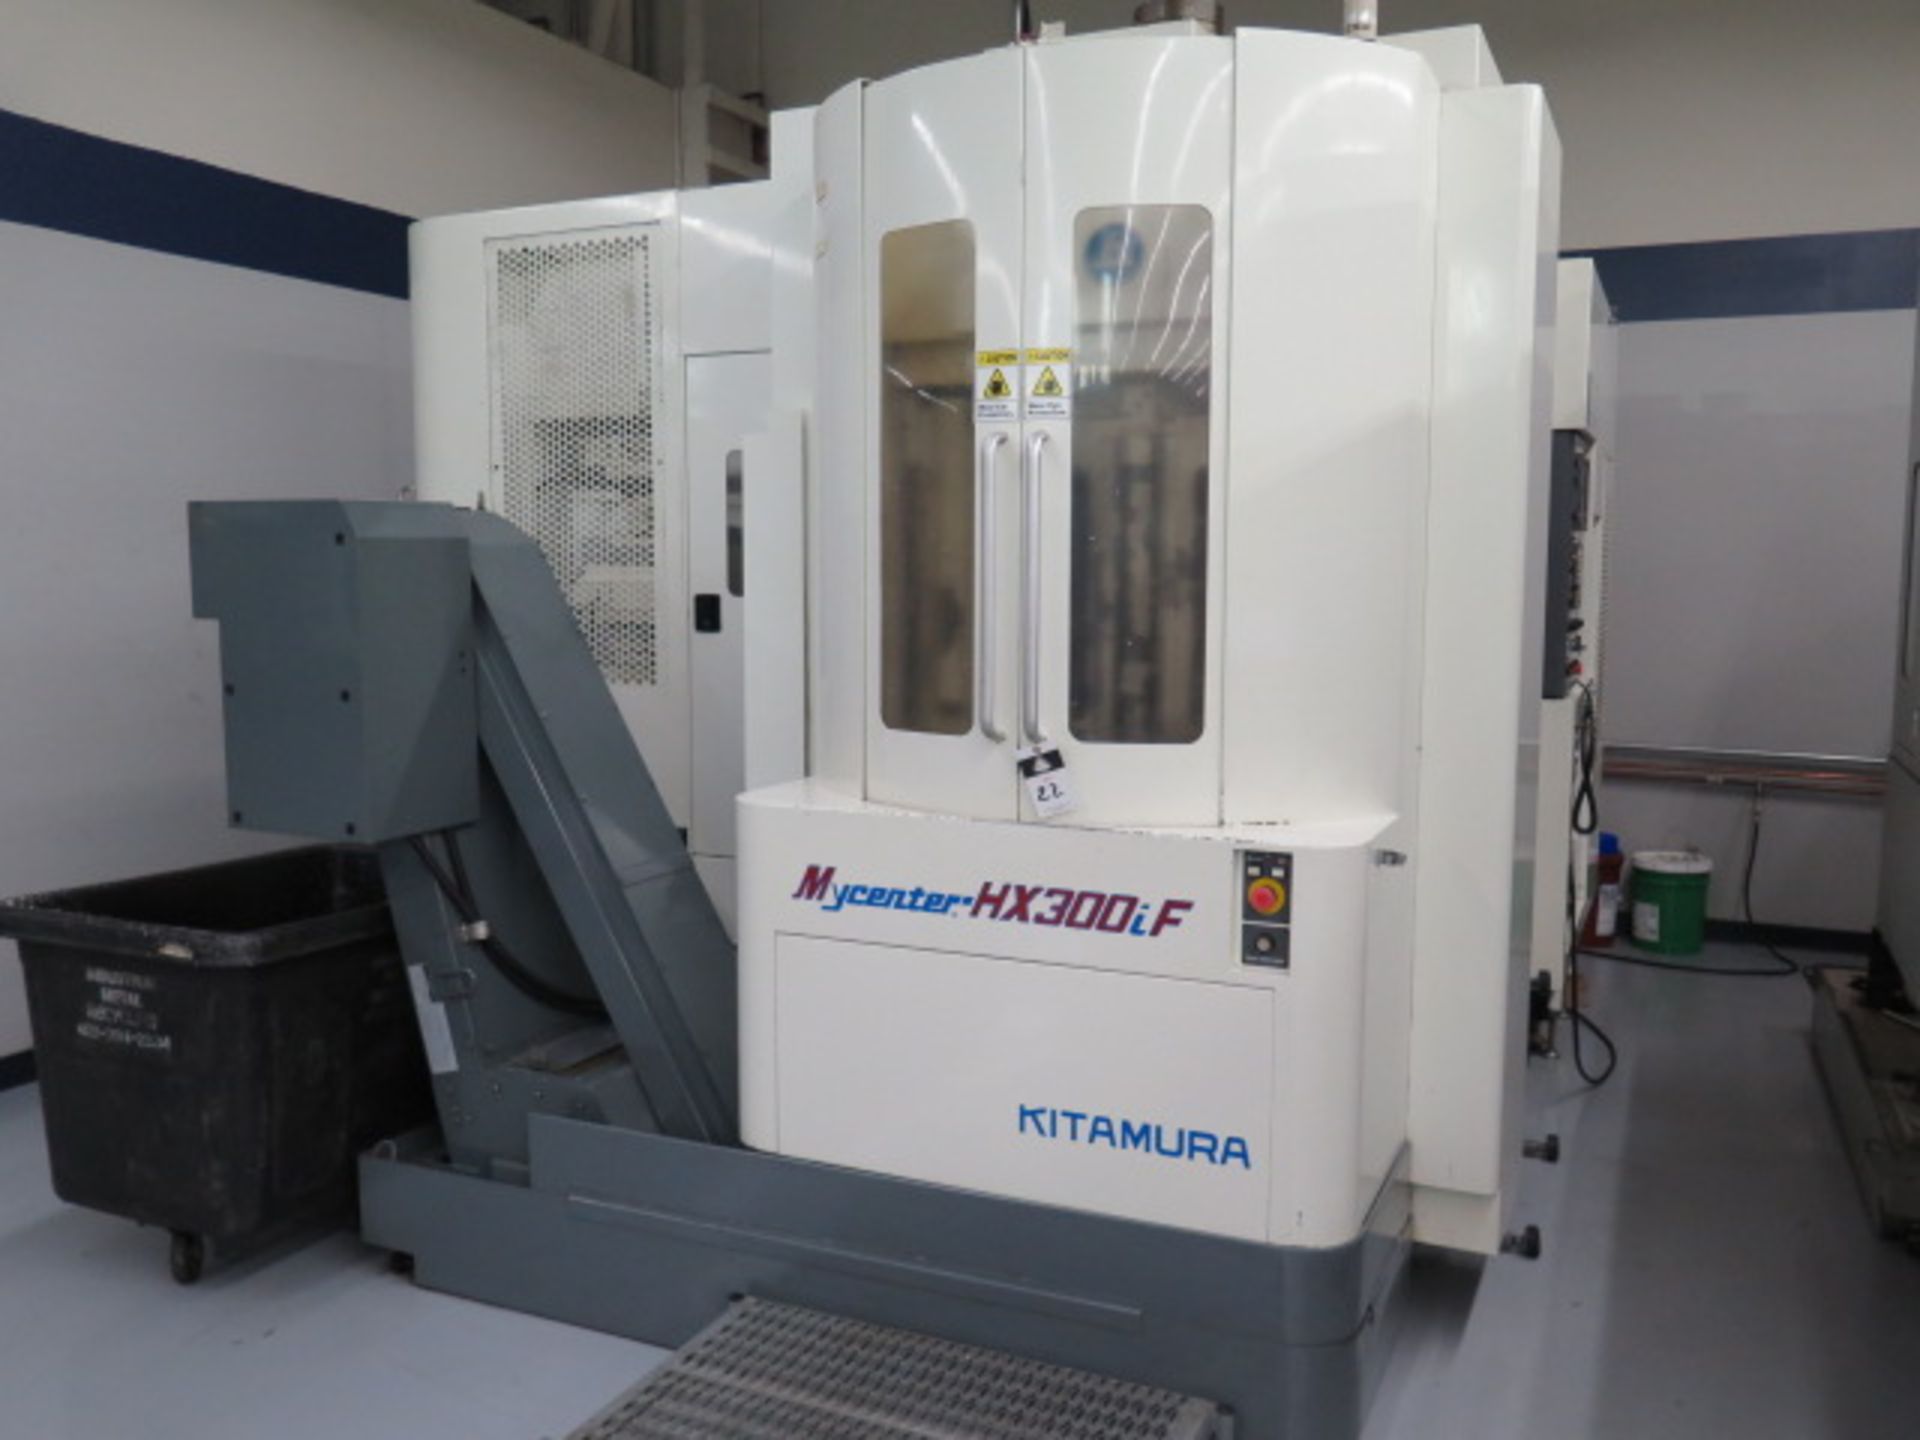 Kitamura Mycenter HX300iF 2-Paller 4-Axis CNC Horizontal Machining Center s/n 40975 SOLD AS IS - Image 2 of 26